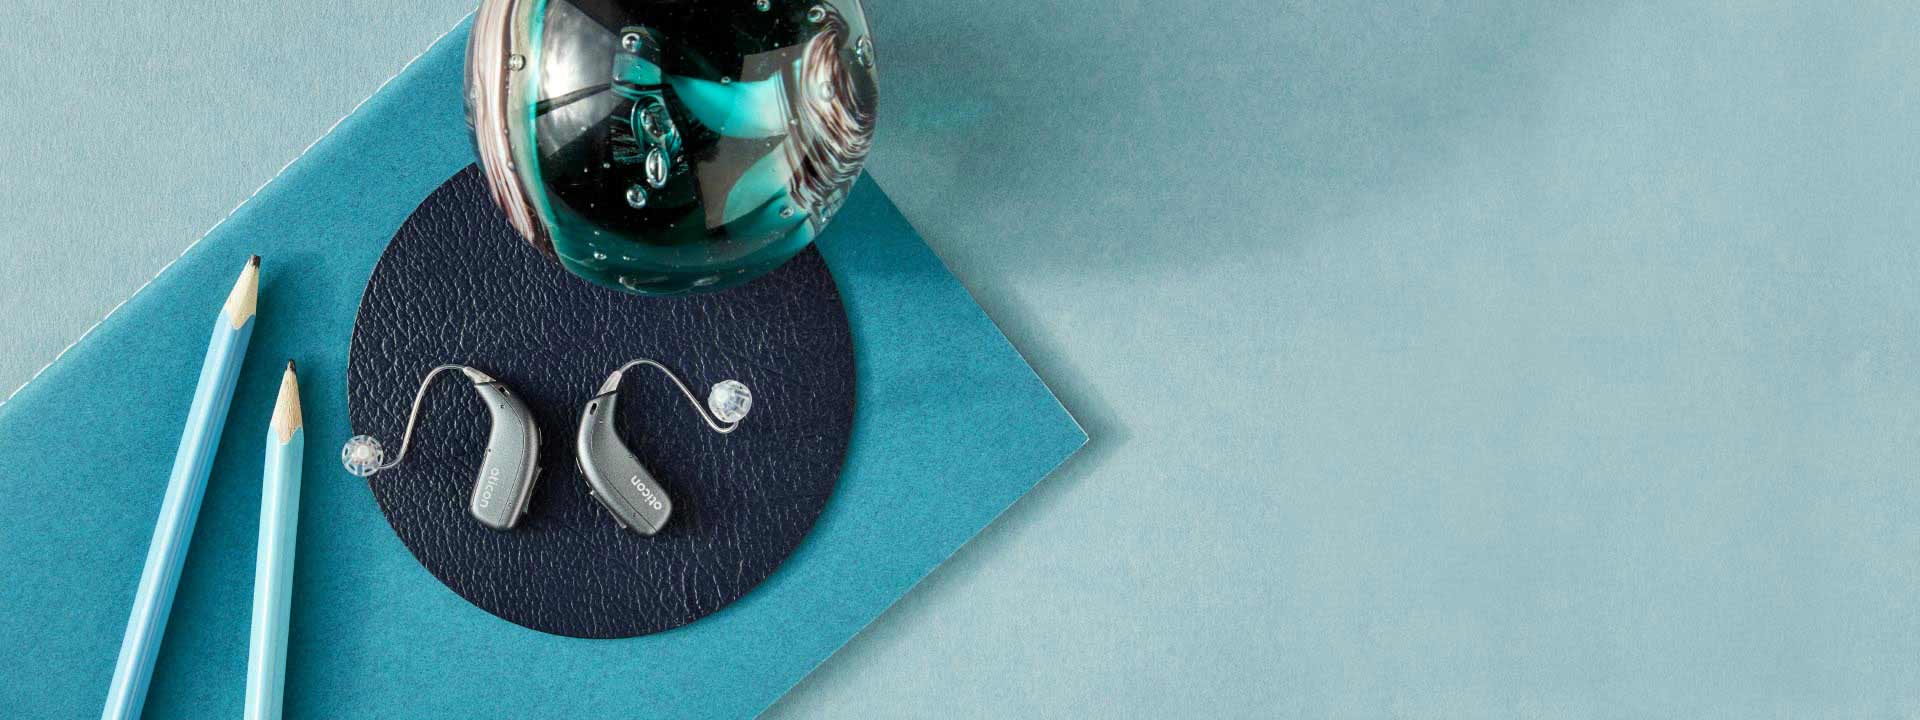 Image shows two hearing aids placed on a blue background